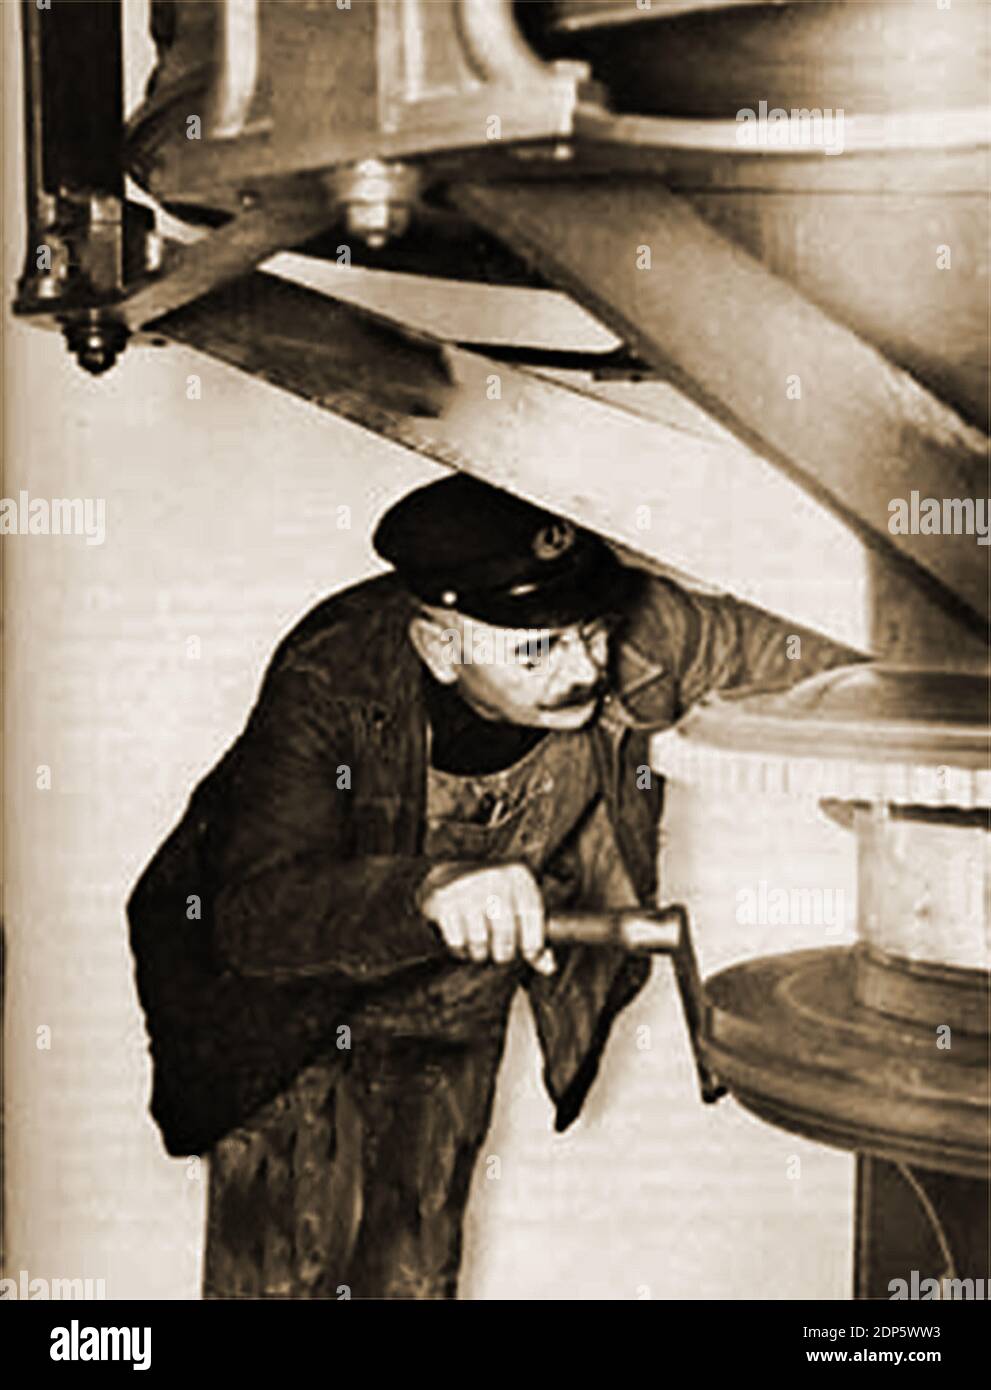 Adjusting the clockwork mechanism of a lighthouse lamp, a task that used to be regularly carried out before the automation of British lighthouses. Stock Photo